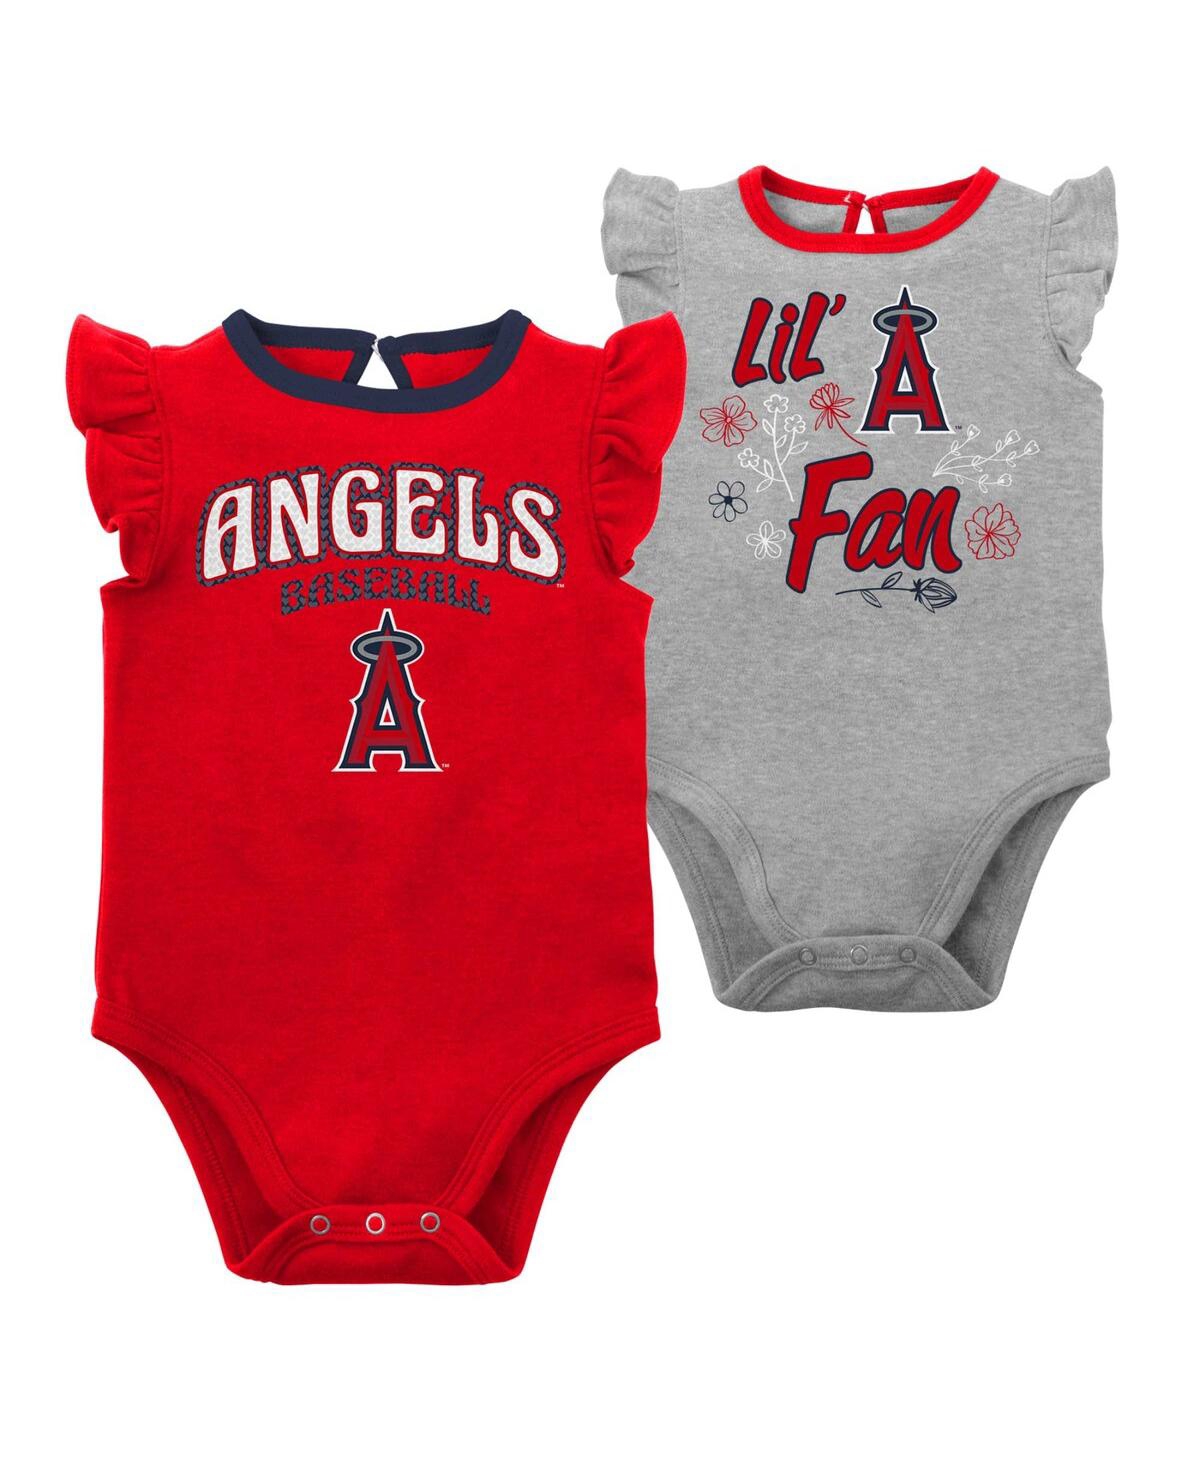 Outerstuff Babies' Newborn And Infant Boys And Girls Red, Heather Gray Los Angeles Angels Little Fan Two-pack Bodysuit In Red,heather Gray